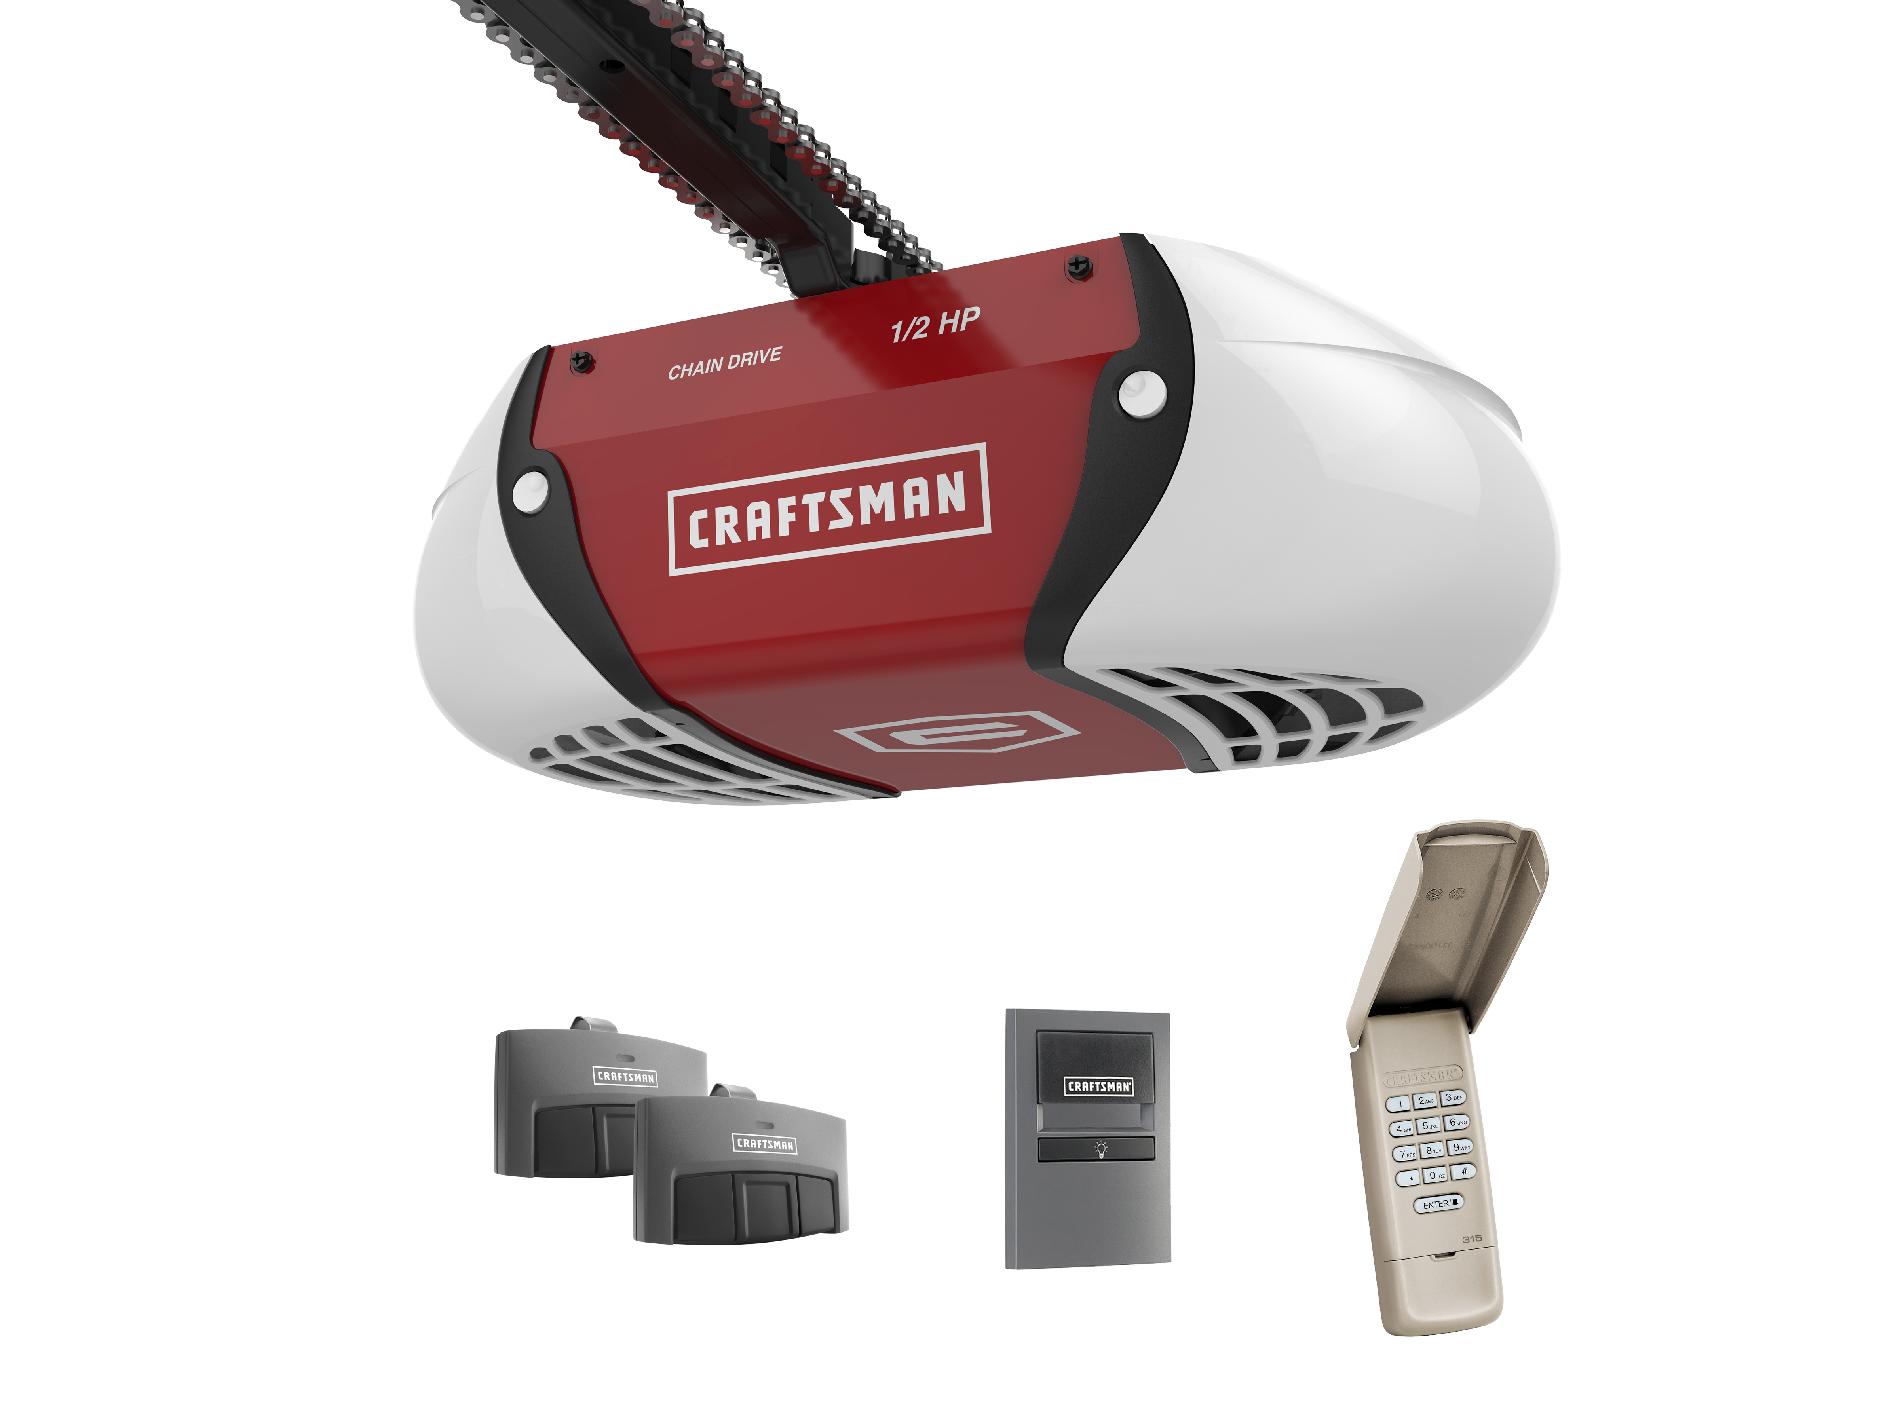 0012381549856 - &#189; HP CHAIN DRIVE GARAGE DOOR OPENER WITH TWO MULTI-FUNCTION REMOTES AND KEYPAD